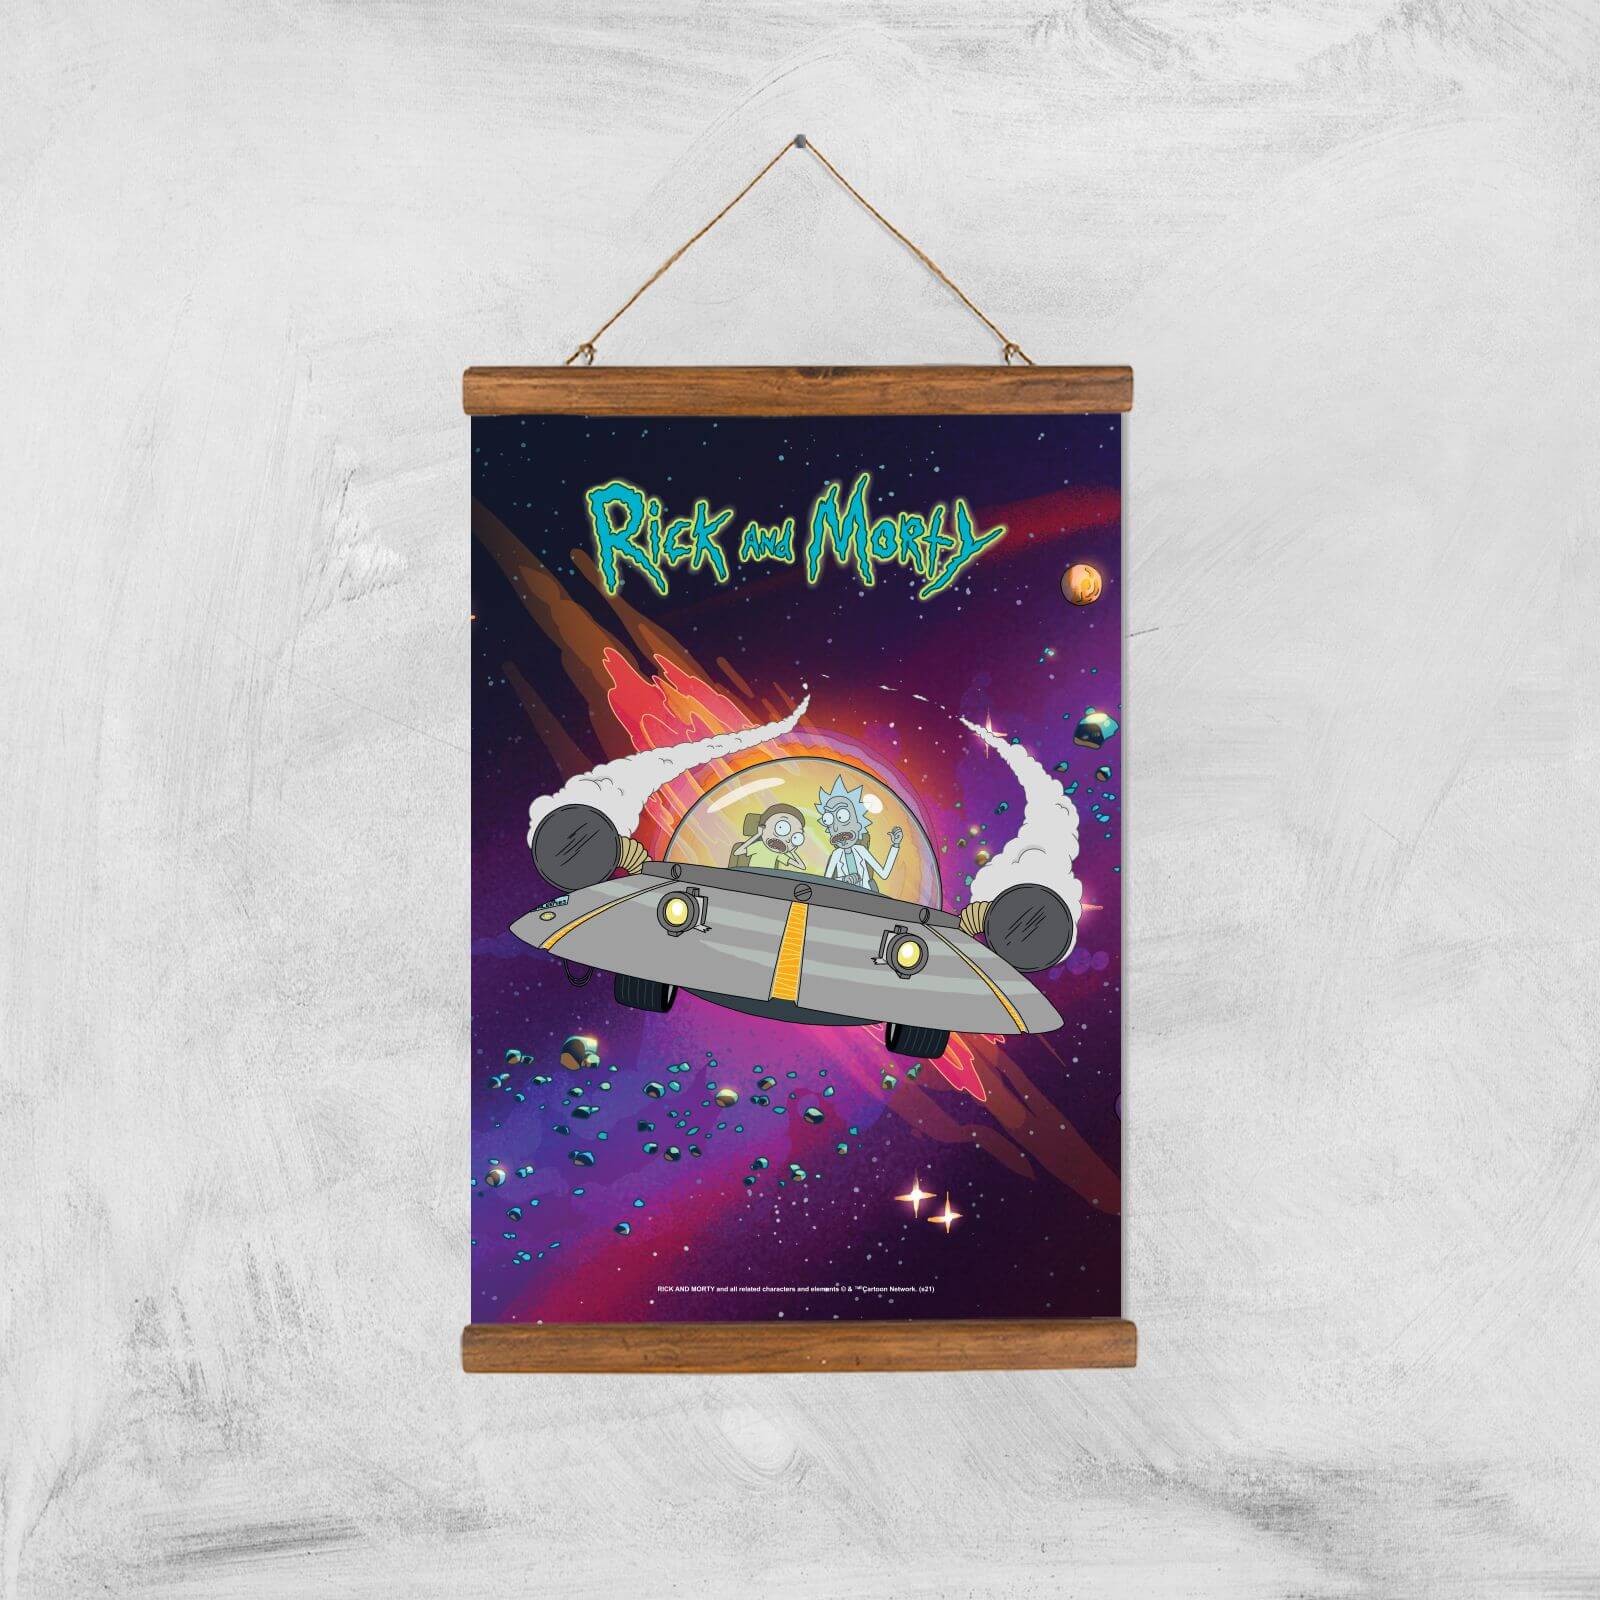 Rick and Morty Rocket Adventure Giclee Art Print - A3 - Wooden Hanger